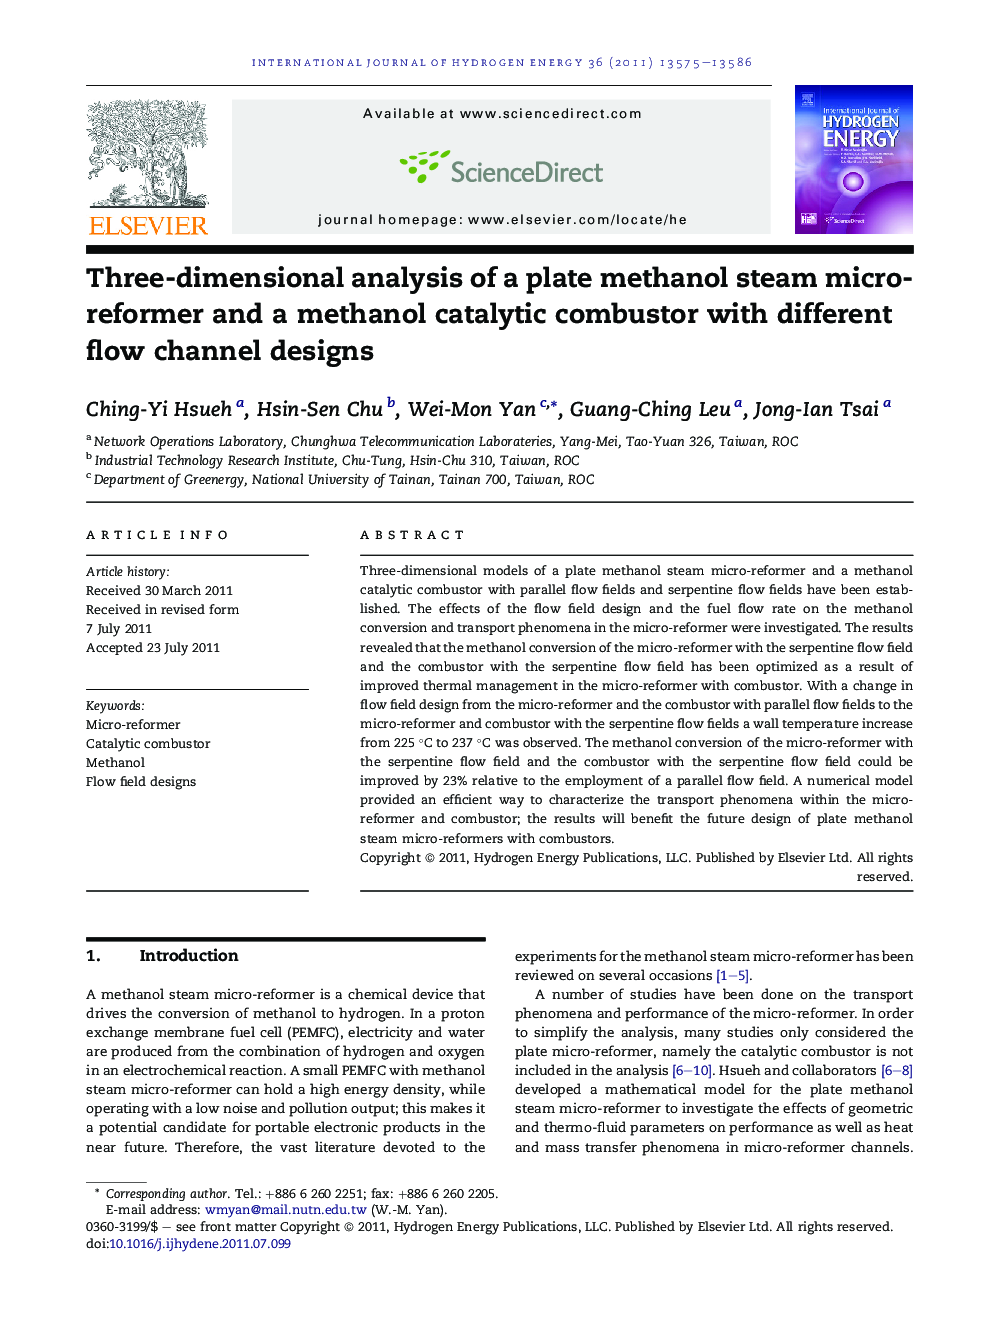 Three-dimensional analysis of a plate methanol steam micro-reformer and a methanol catalytic combustor with different flow channel designs